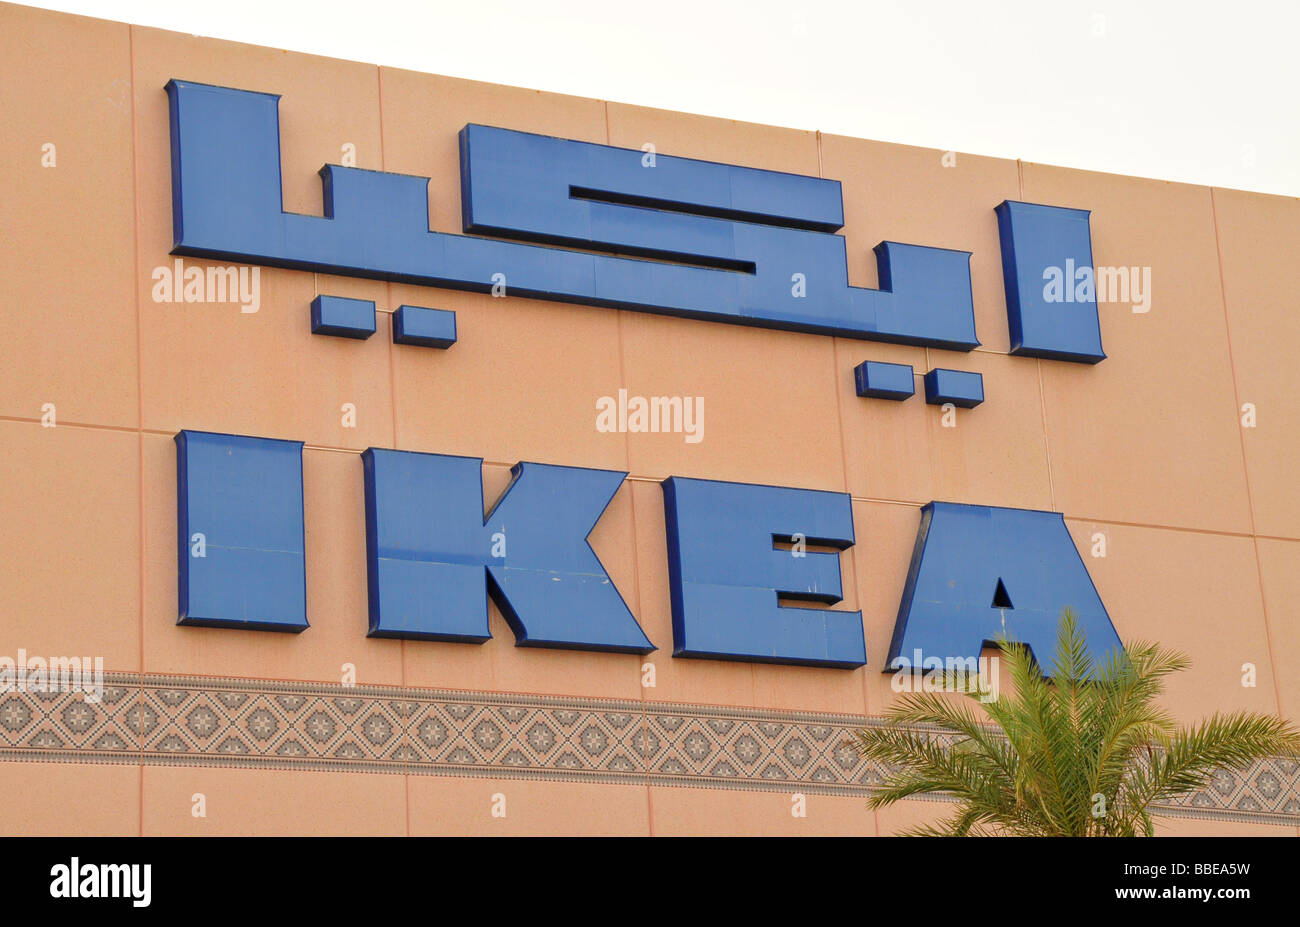 Sign at the Ikea store in Abu Dhabi's Breakwater district, United Arab Emirates, Arabia, Middle East, Orient Stock Photo